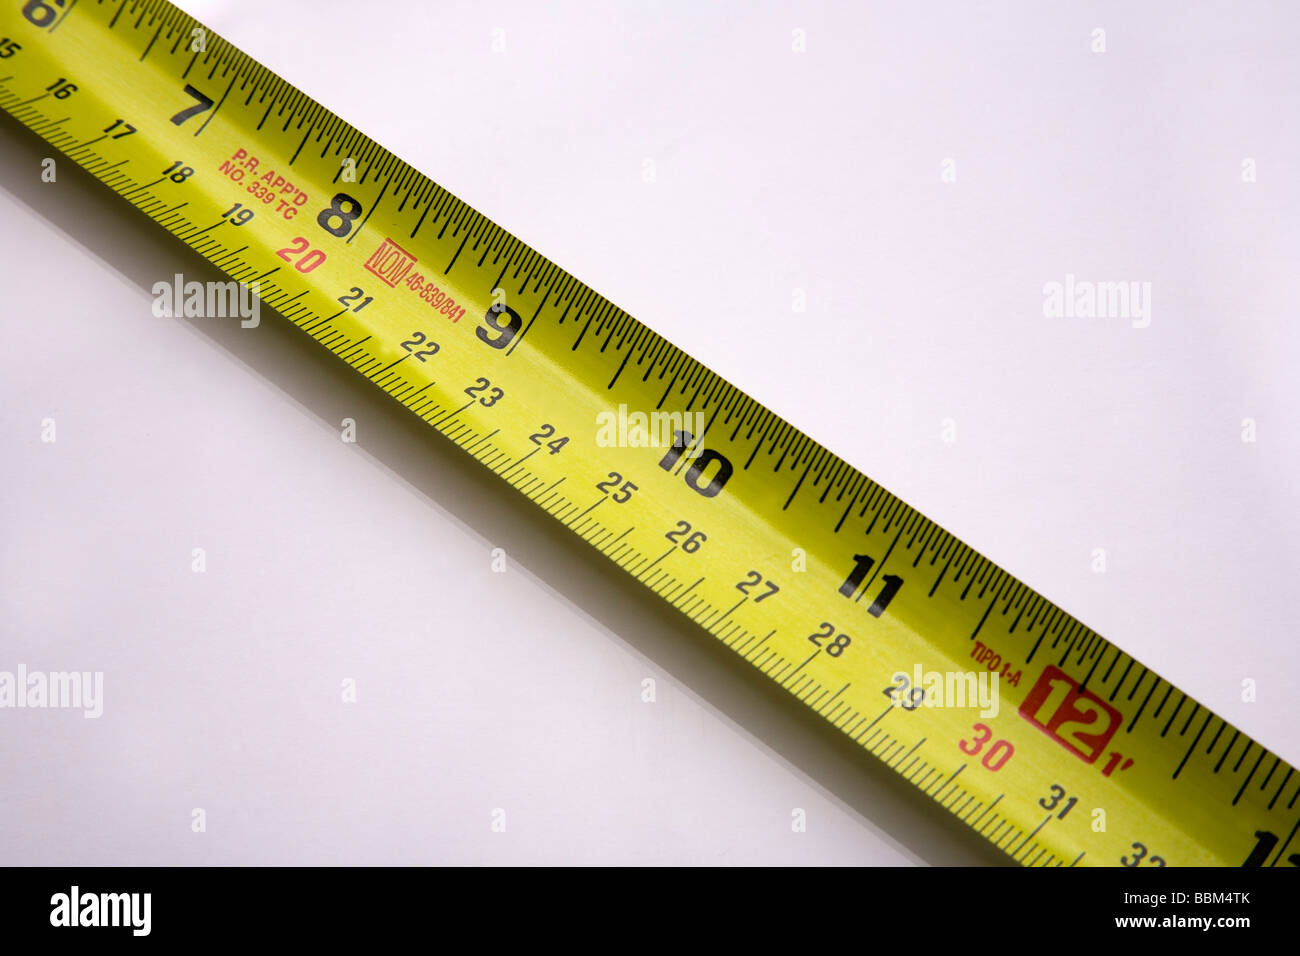 Studio close up shot of extended tape measure showing metric and imperial measurement Stock Photo